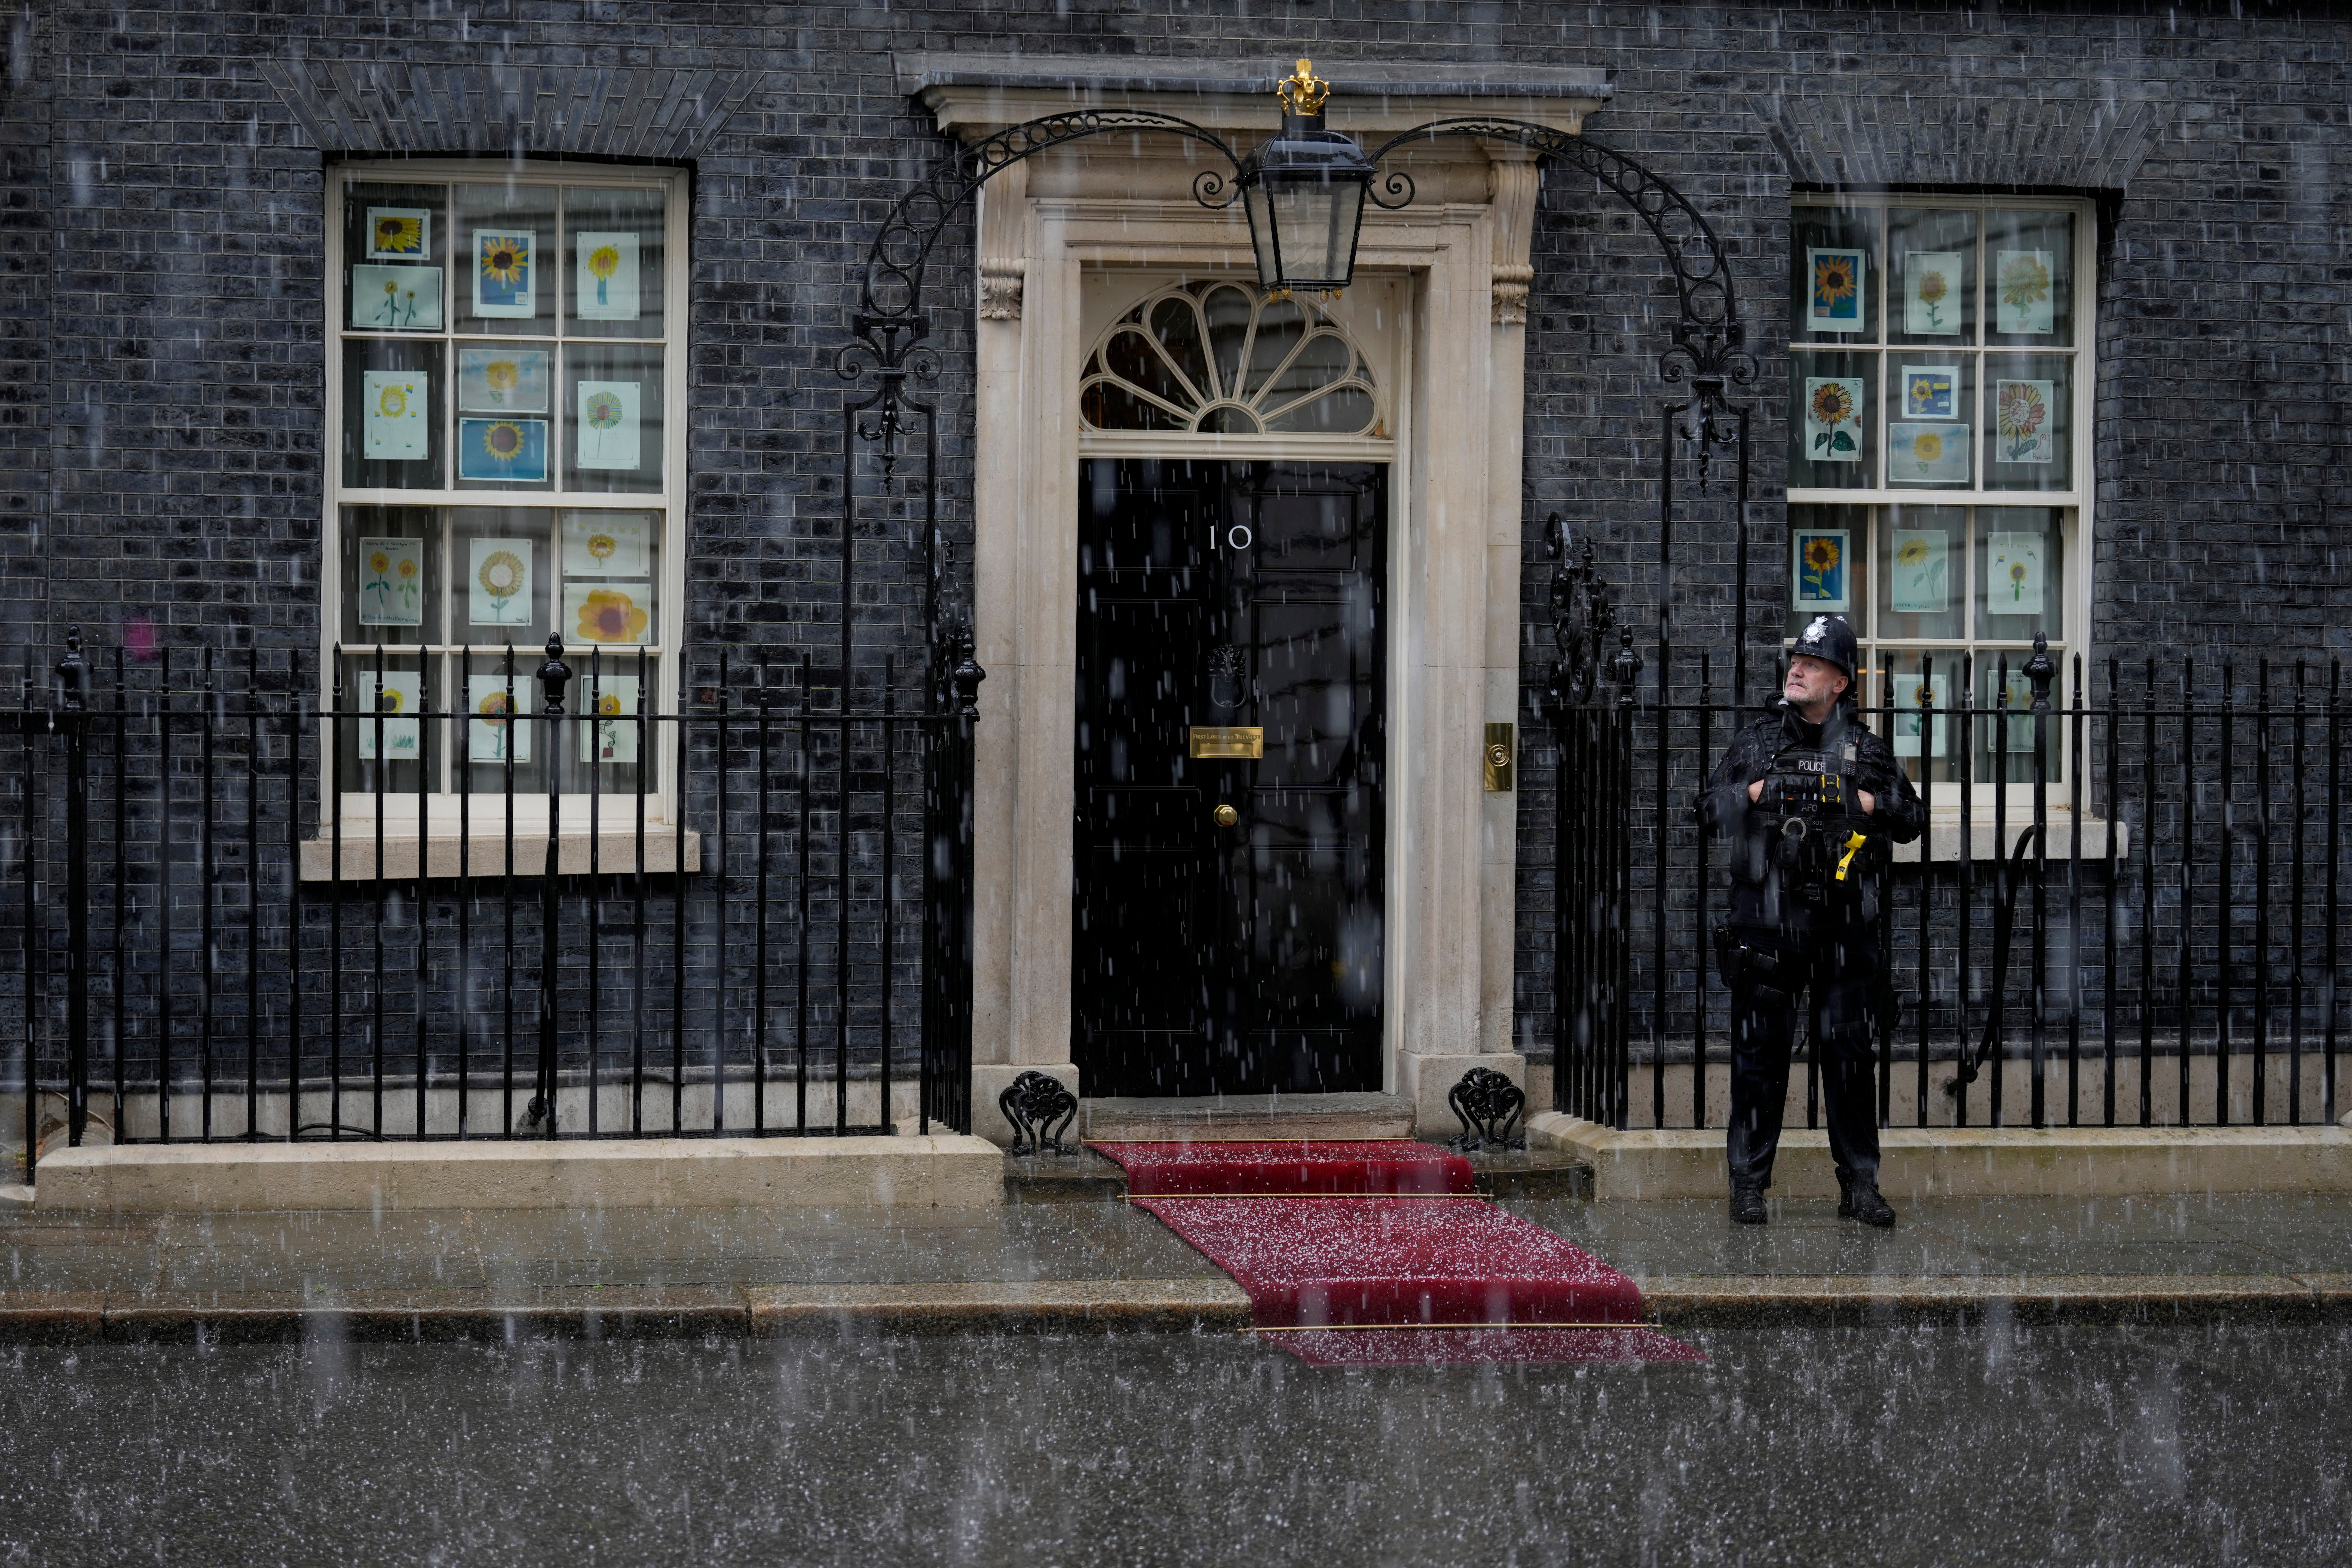 Hail falls during a thunder and lighting storm as a police officer stands guard outside 10 Downing Street in London